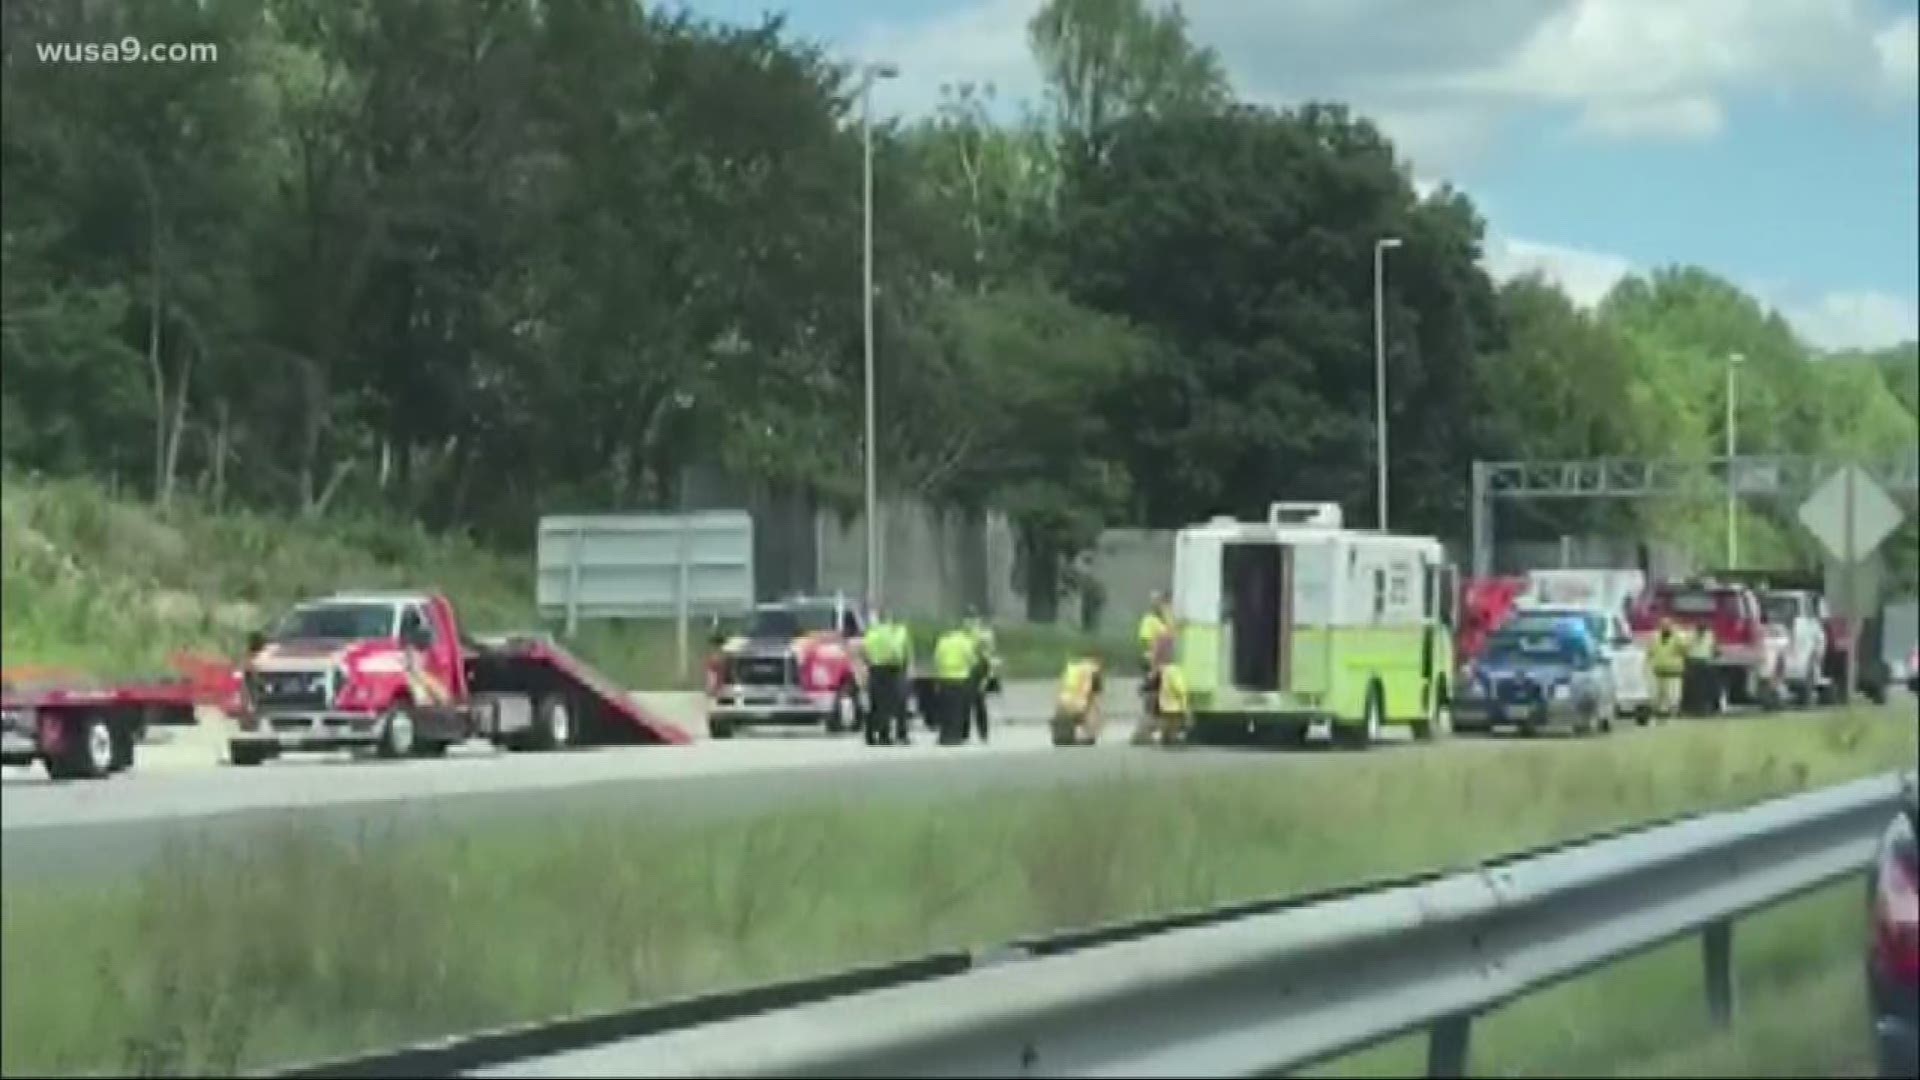 Interstate 66 west bound is closed after a multi-car crash that left one person dead and six other hurt.
It happened just before 11 a.m. Saturday near Route 28. Virginia State Police say one of the vehicles slid into the Jersey wall and caught fire.